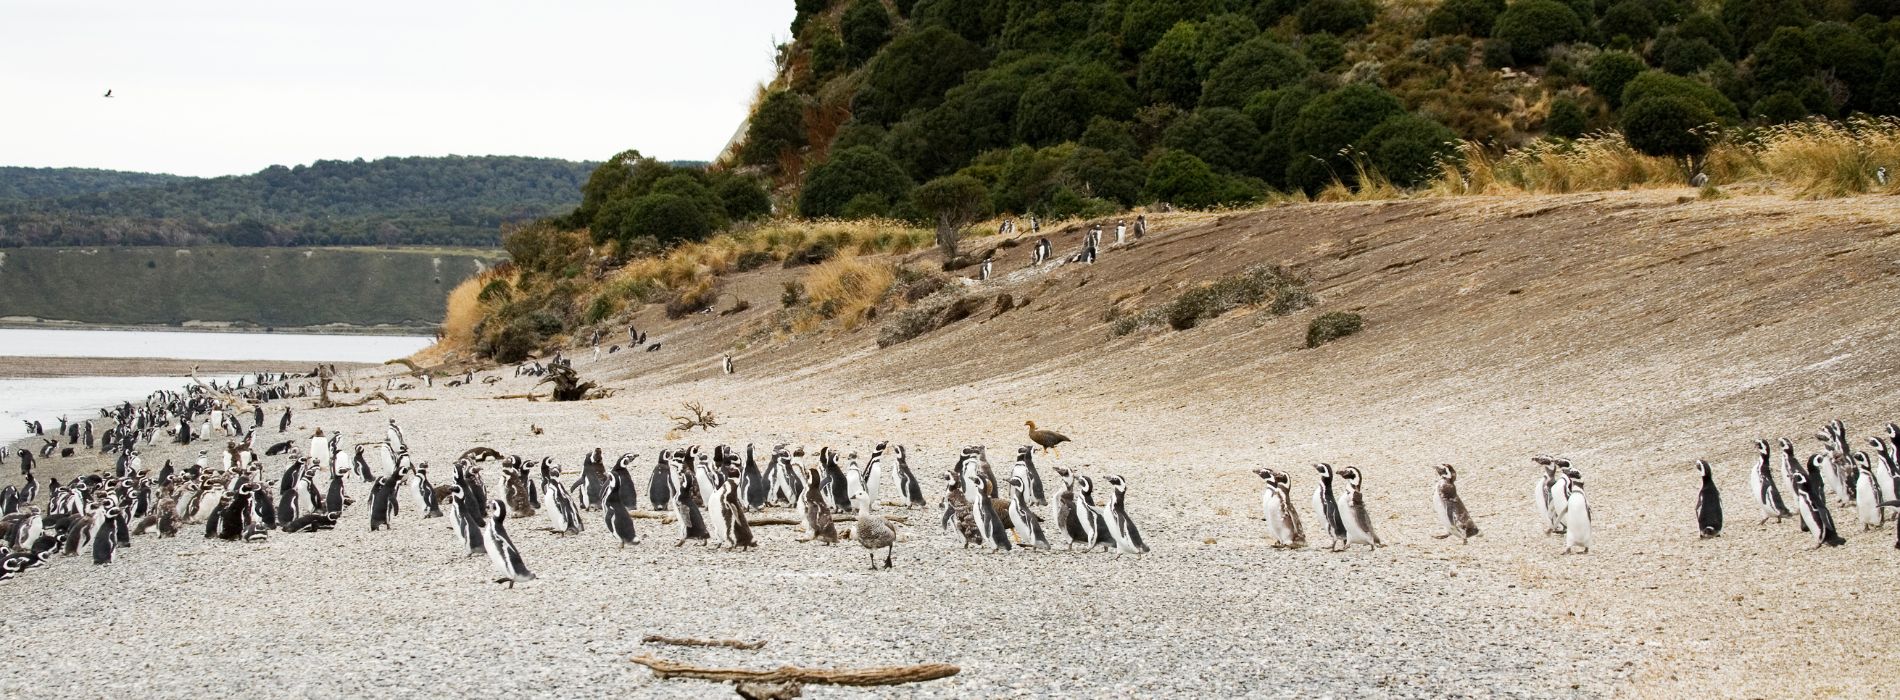 Are there penguins in Argentina?